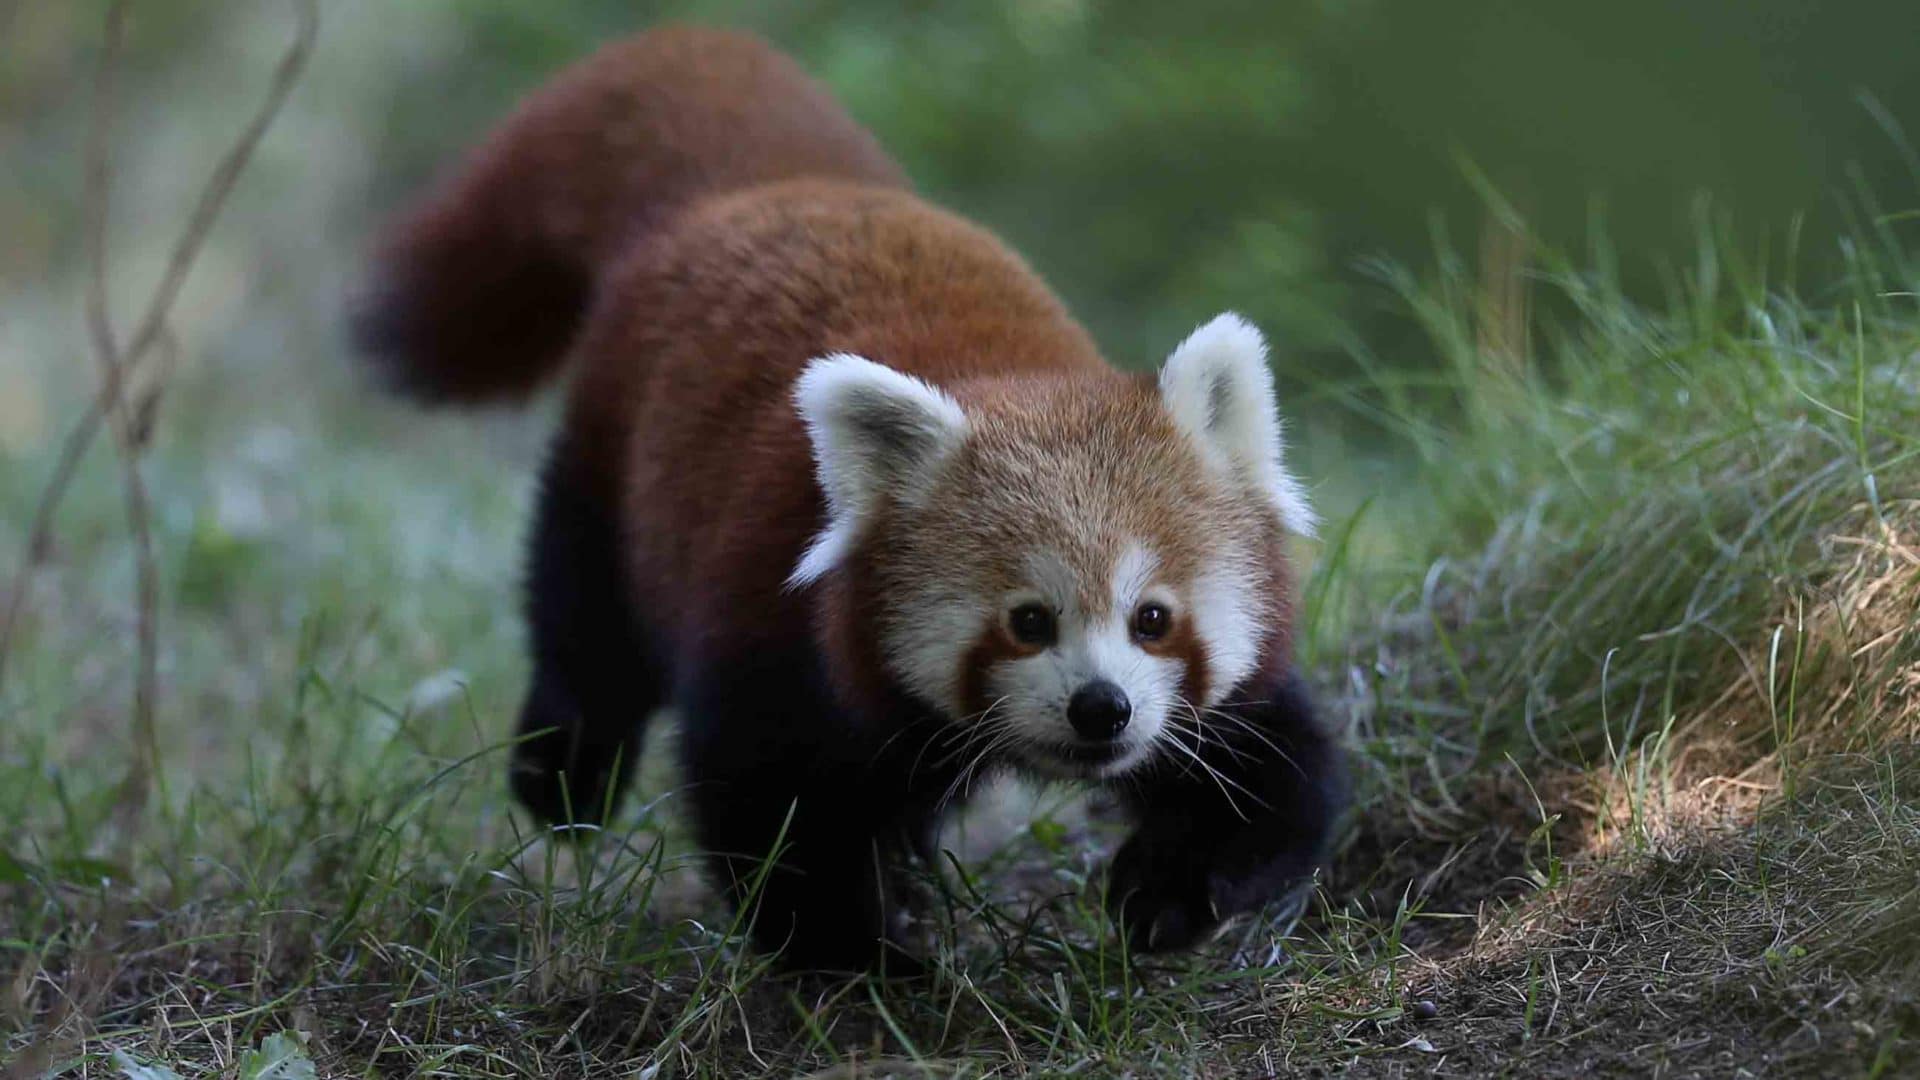 With a remaining wild population estimated at fewer than 10,000 individuals, the red panda is listed as Endangered on the International Union for Conservation of Nature's Red List.